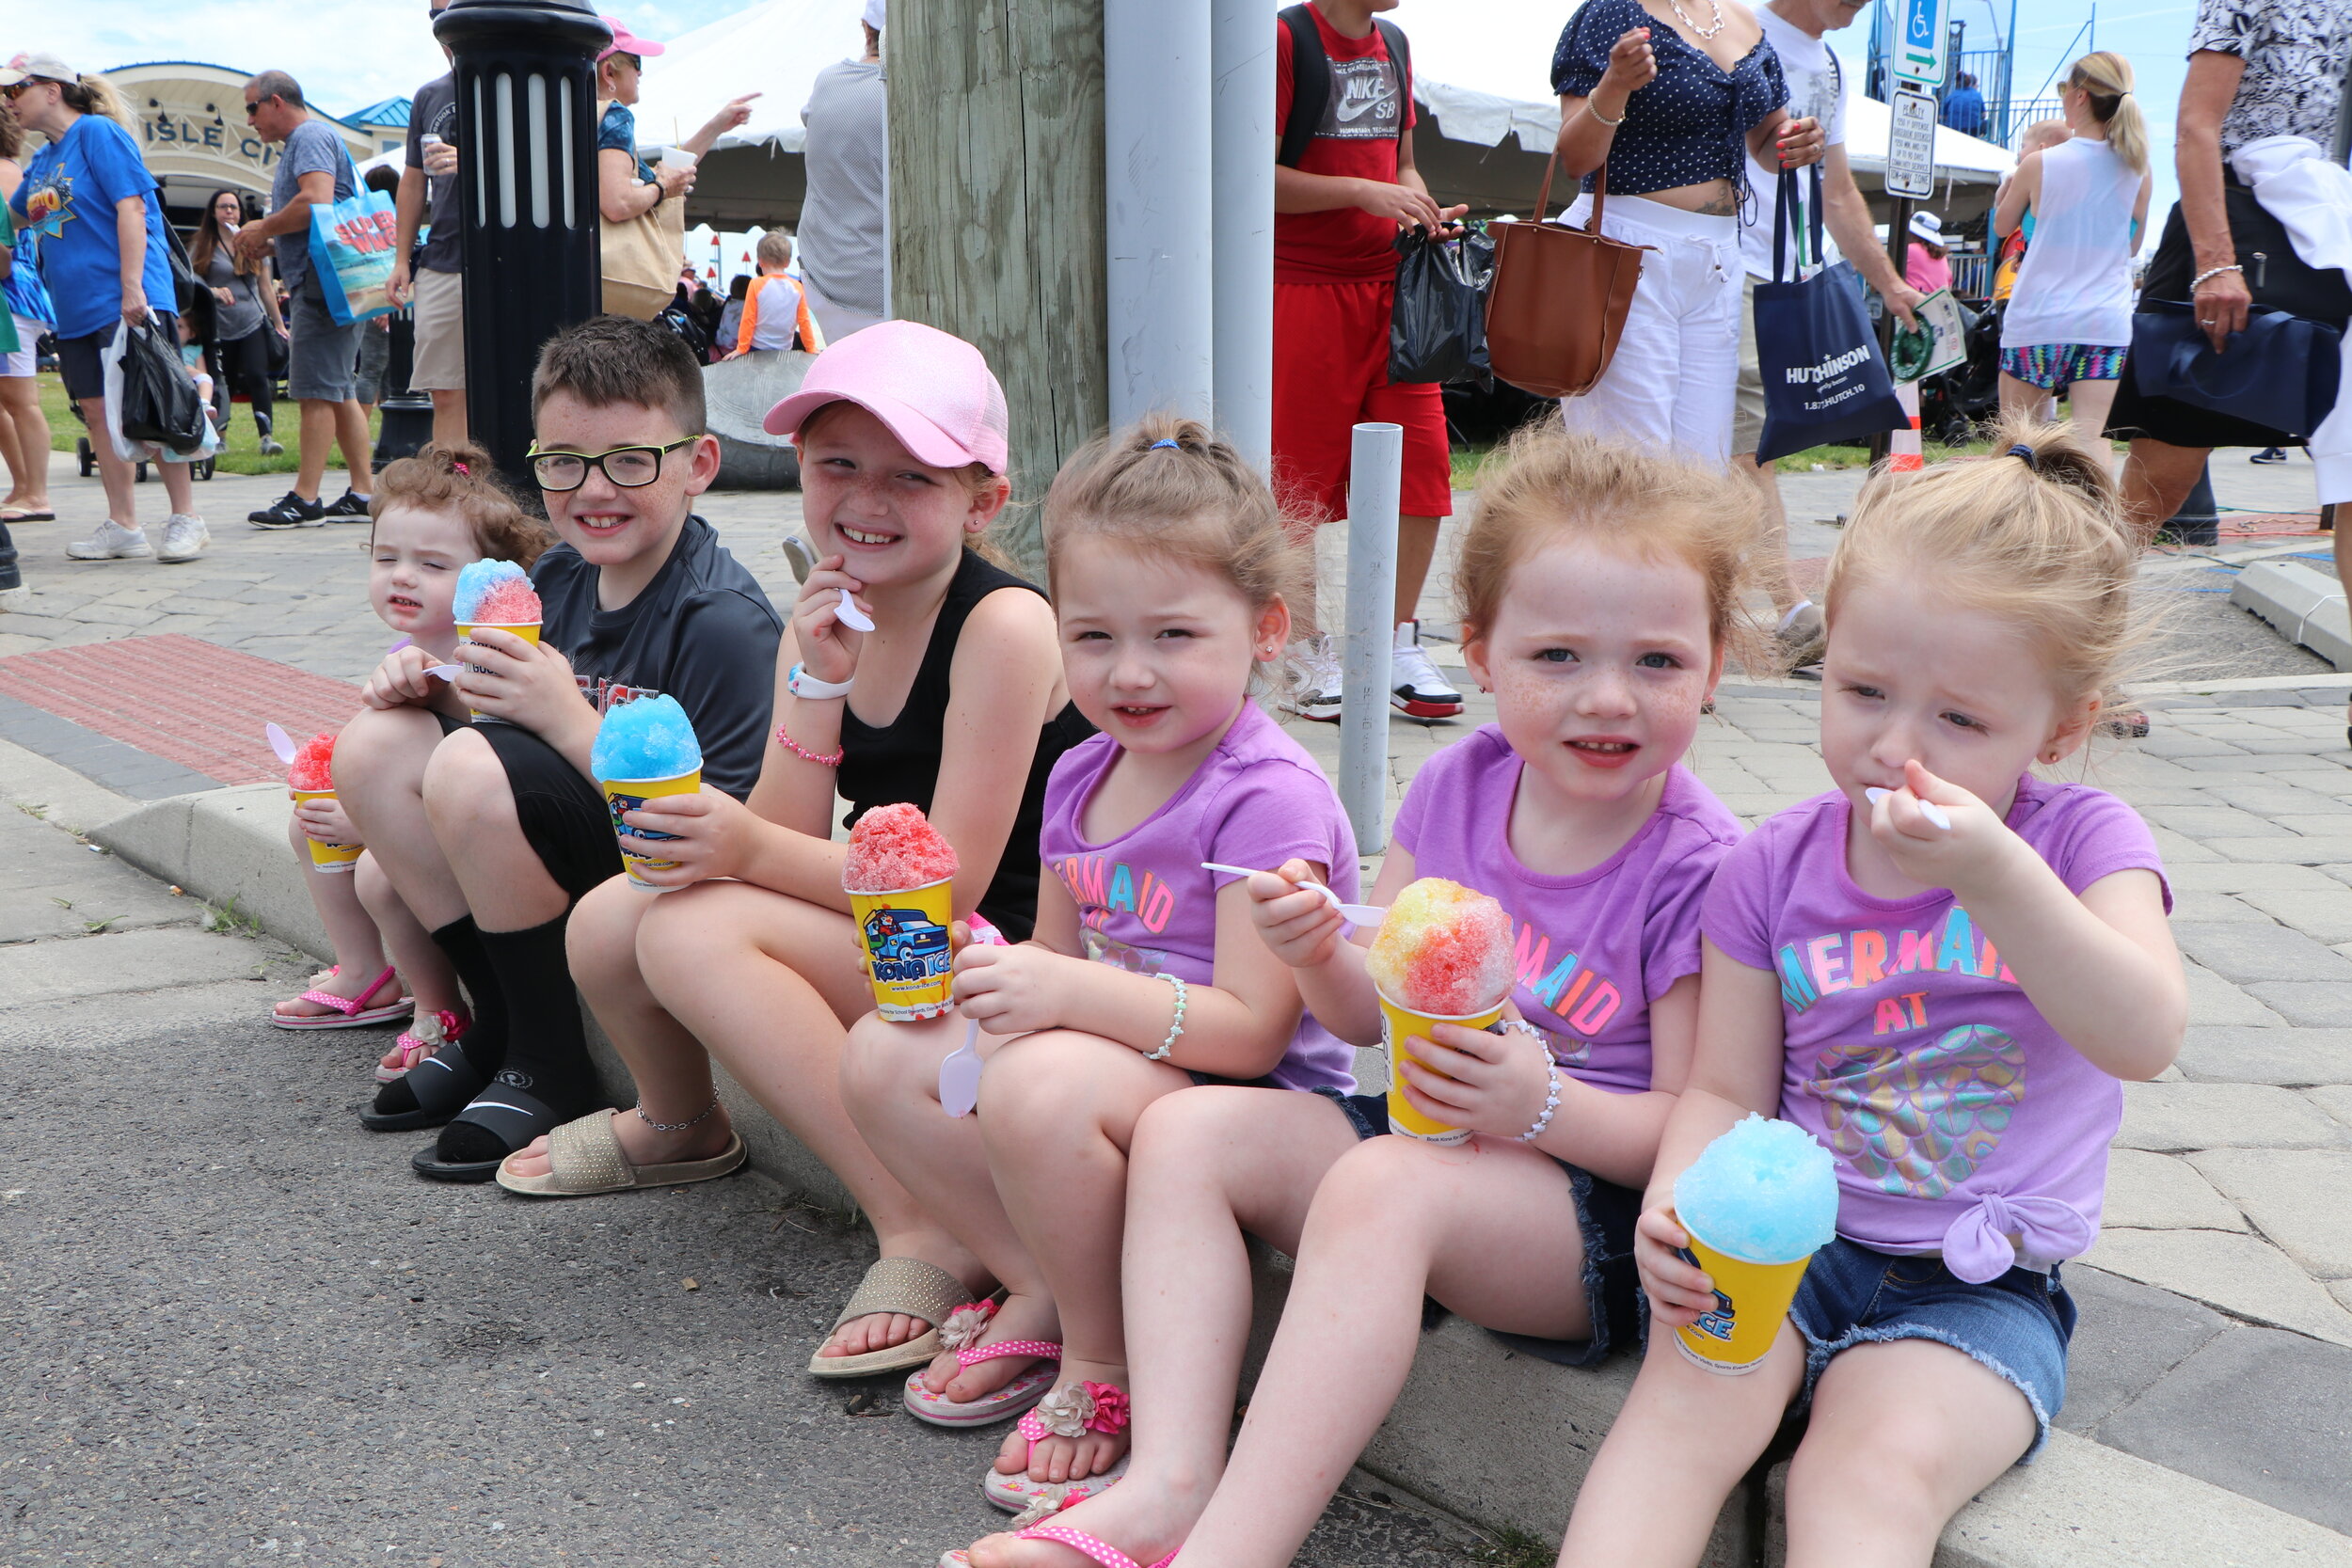 Right to left, Bree, Keira, Avery, Cassidy, Brady and Addison Carr cool off at the Skimmer Festival.